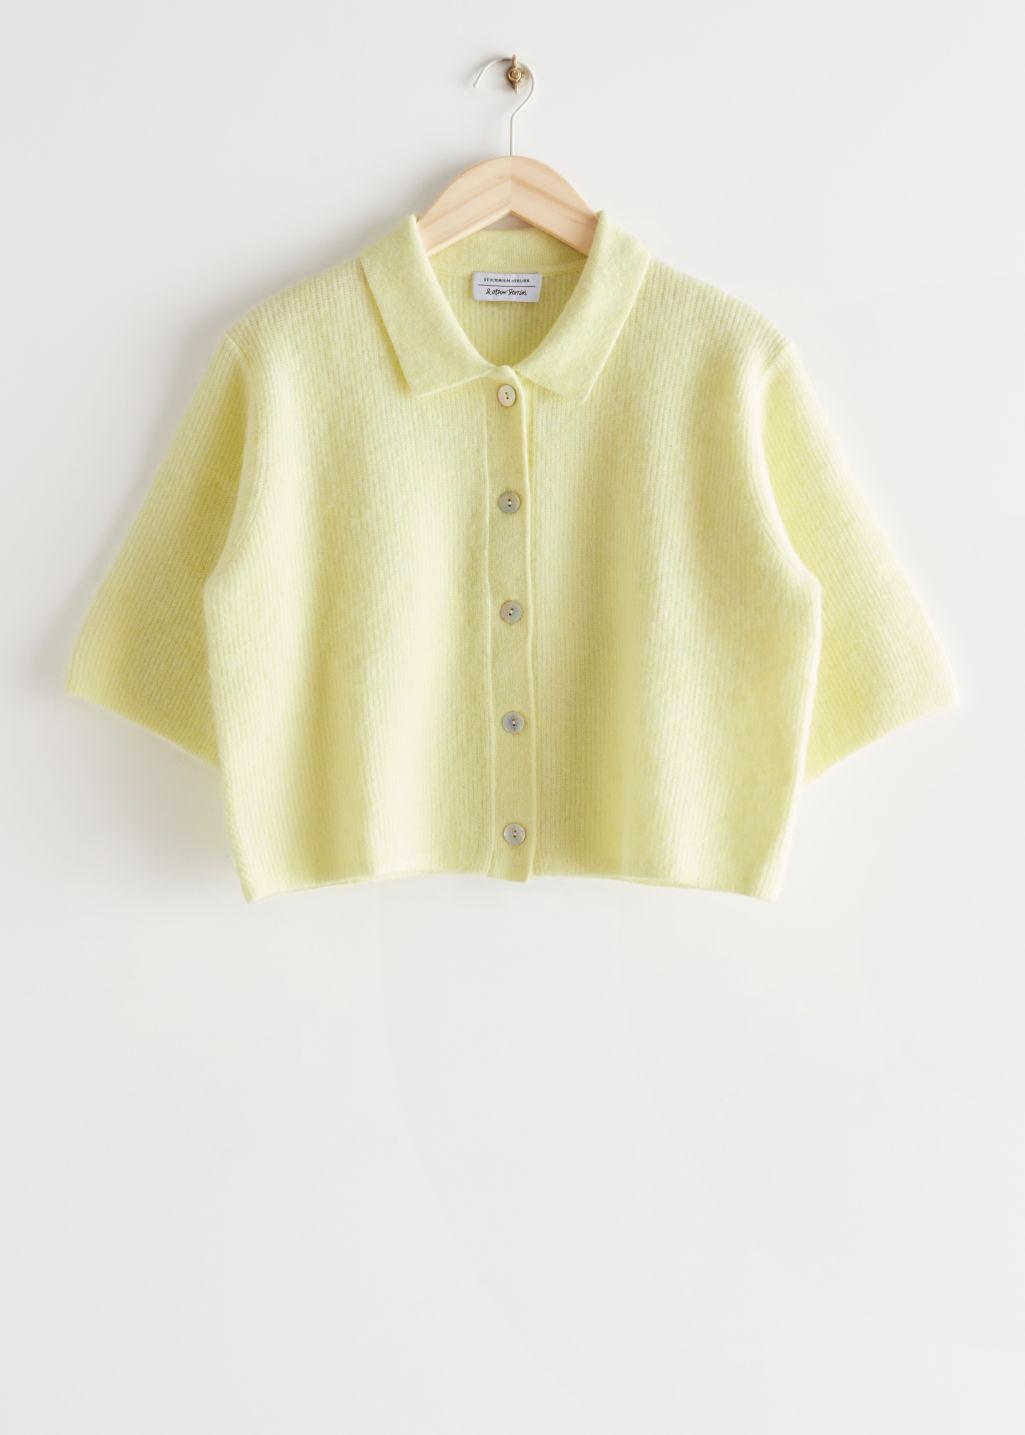 & Other Stories Cropped Collared Knit Cardigan in Yellow | Lyst